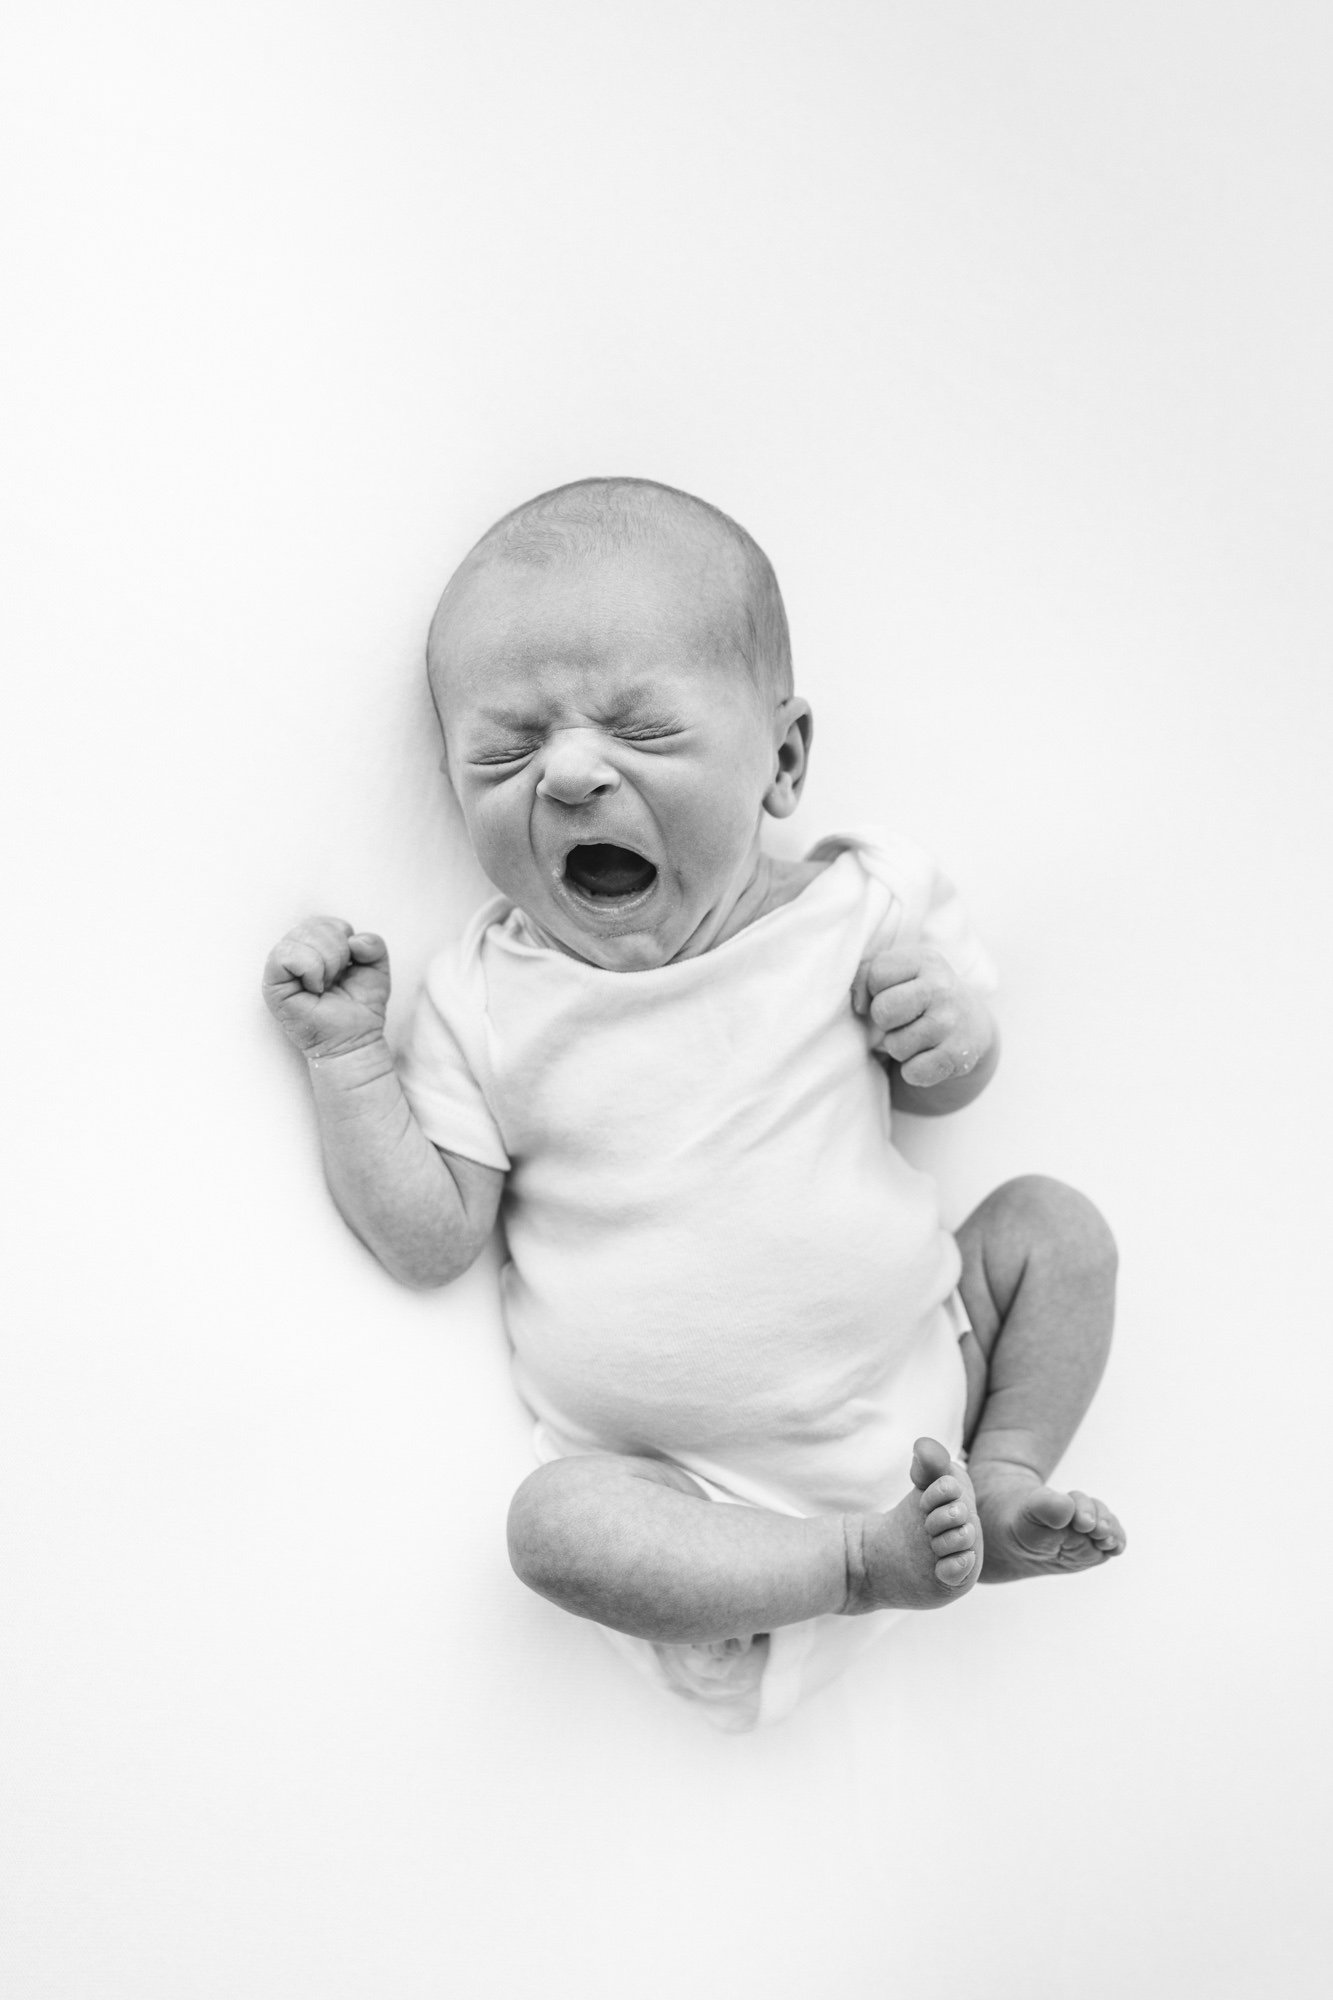  Nicole Hawkins photography offers classic, luxurious photos for newborns. She offers in studio or in-home sessions to meet every family’s needs.&nbsp; #instudionewbornsession #NicoleHawkinsphotography #newbornportraits #NewJerseynewbornphotographer 